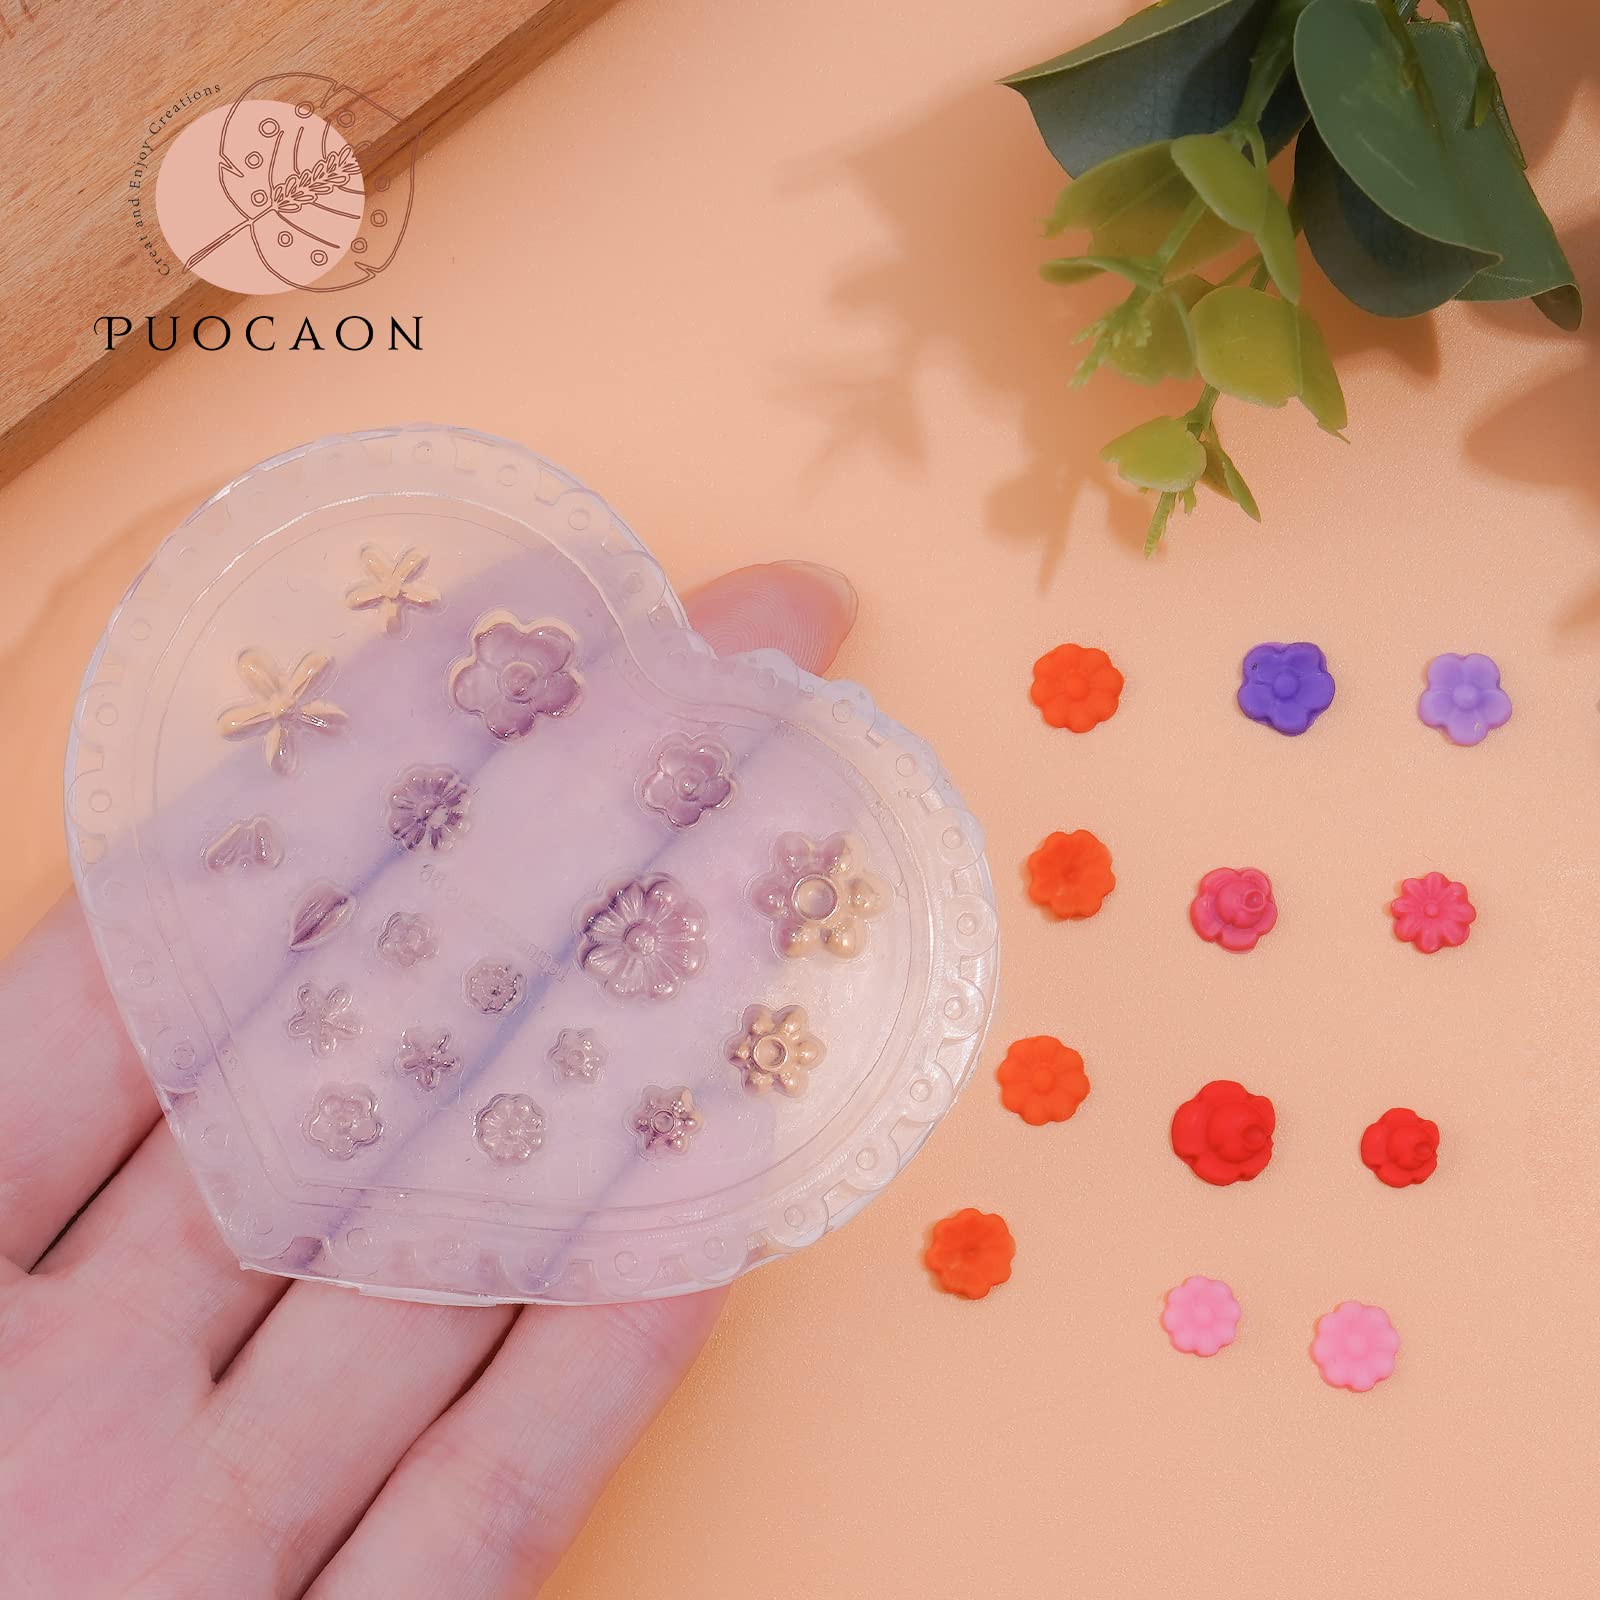 Puocaon Clay Molds Mini Fllower and Leaf Shapes 4 Pcs